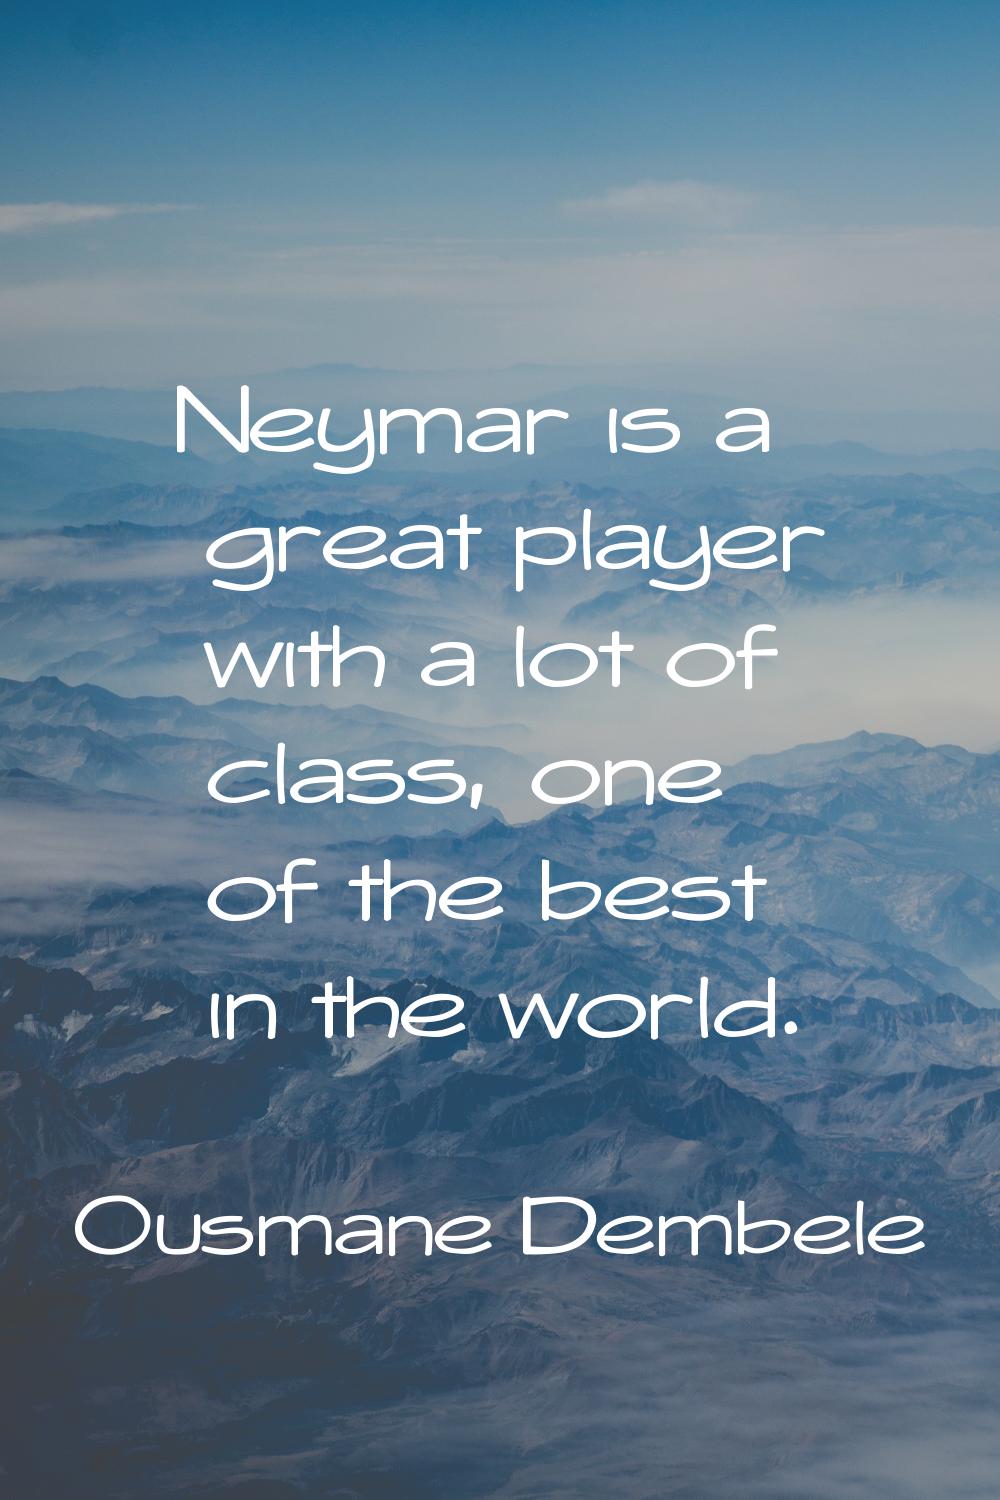 Neymar is a great player with a lot of class, one of the best in the world.